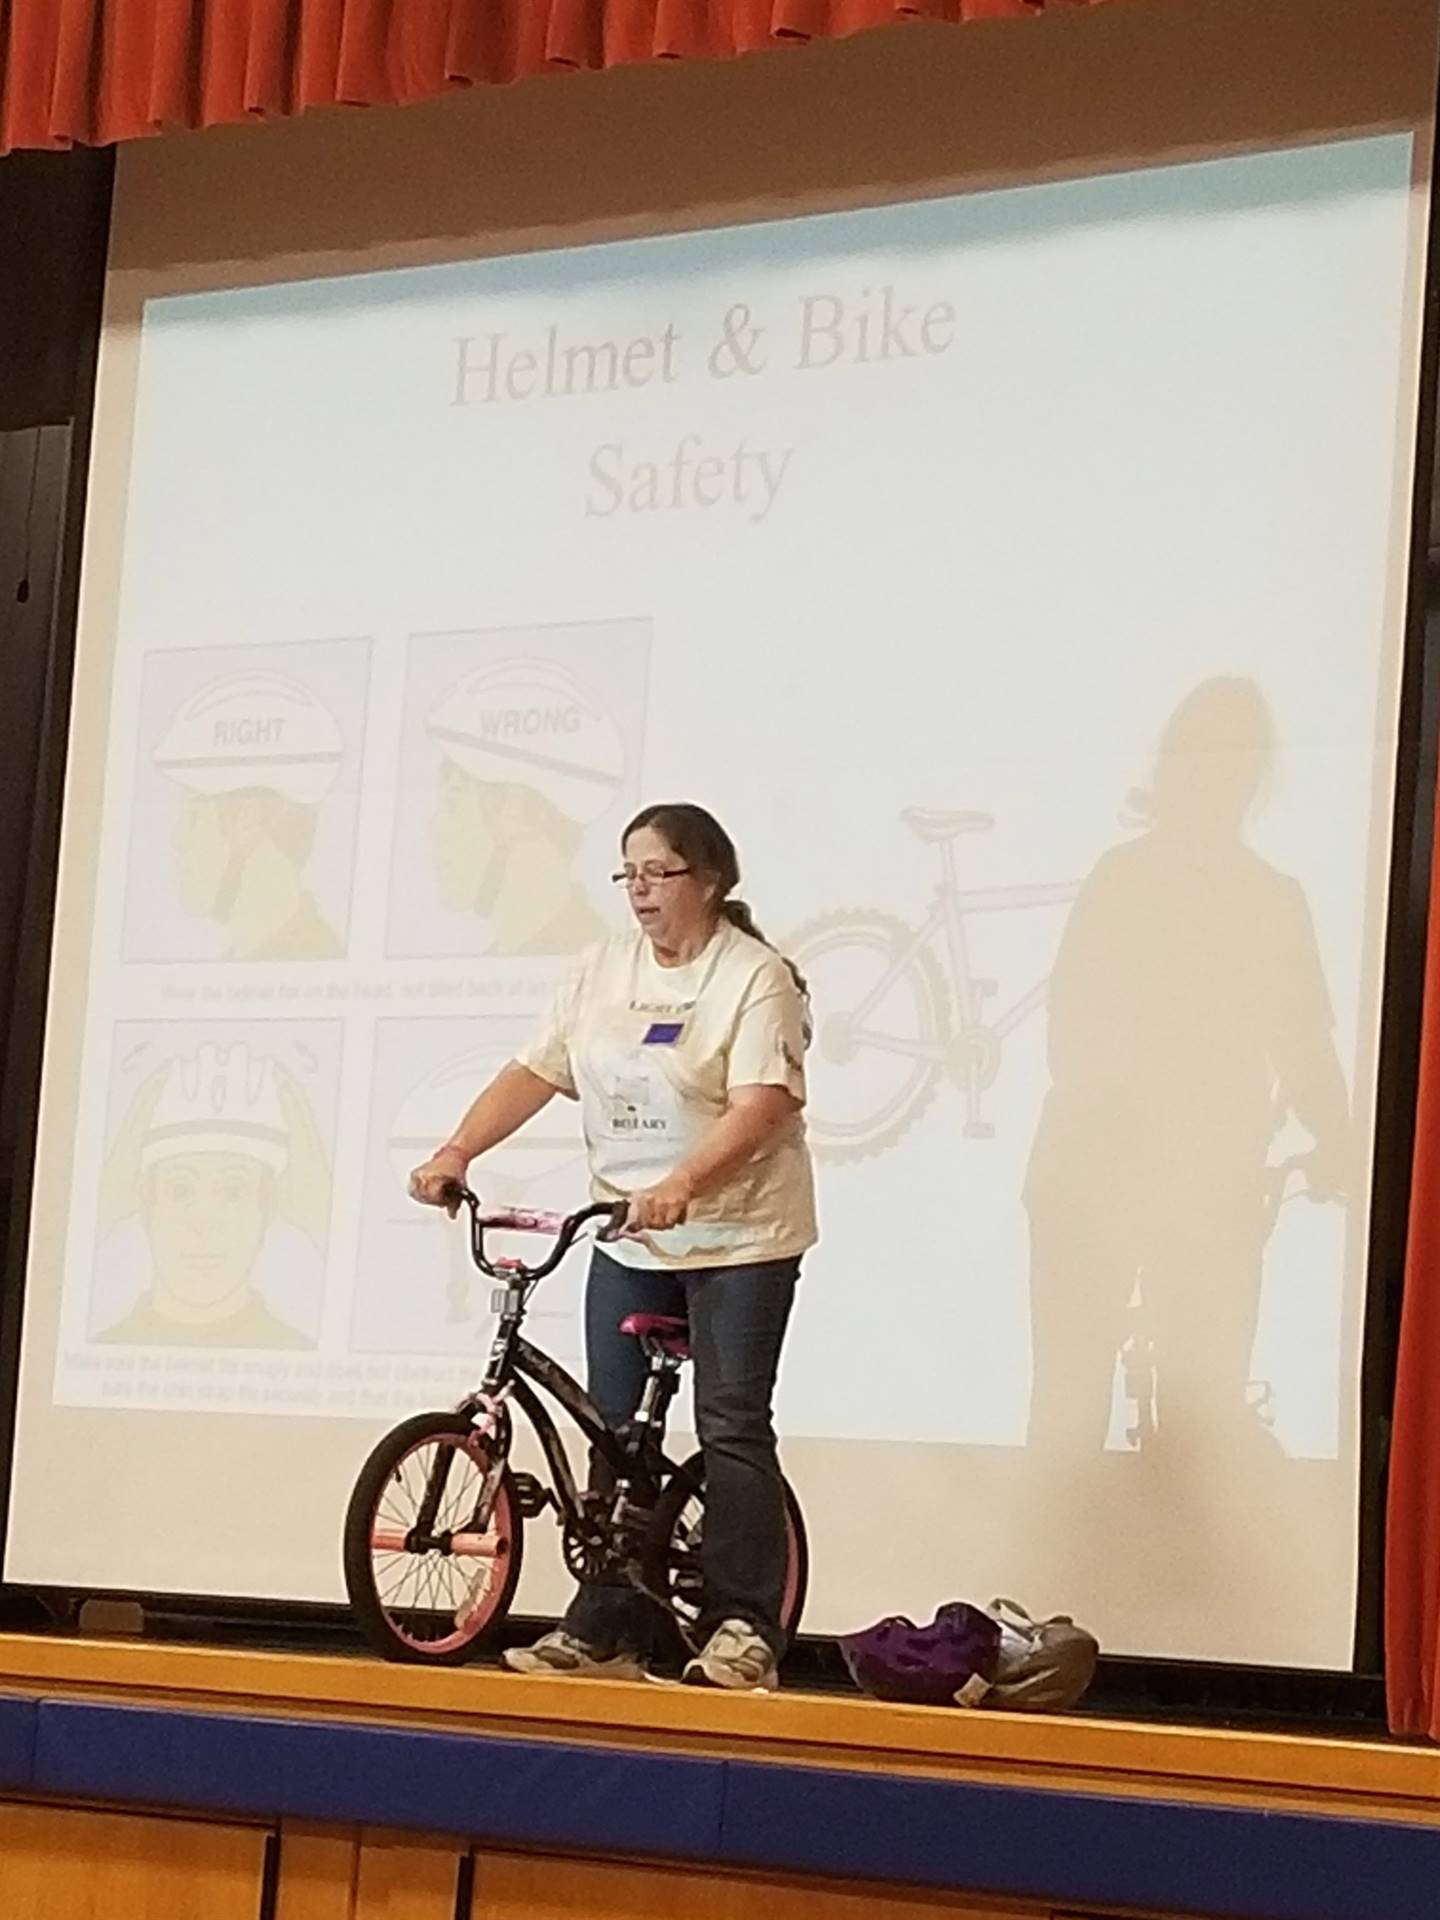 Mrs. Haddad teaches bicycle safety with her bike!